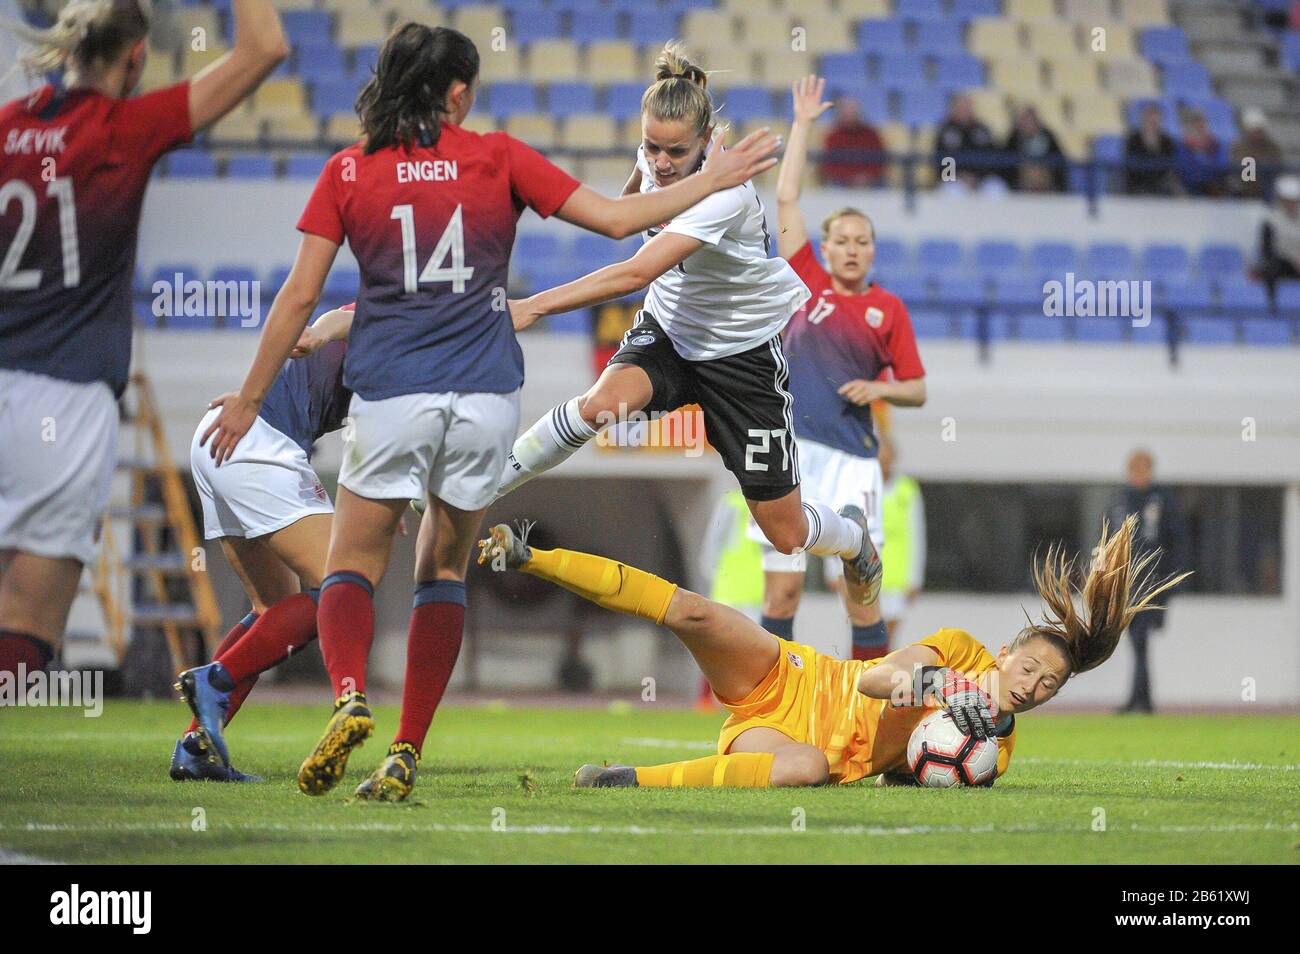 Lagos, Portugal. 07th Mar, 2020. LAGOS, PORTUGAL: MAR 7TH Norwegian goalkeeper Cecilie Haustaker Fiskerstrand (1), German midfielder Lena Petermann (27) pictured during the female football game between the national teams of Germany and Norway on the second matchday of the Algarve Cup 2020, a prestigious friendly womensoccer tournament in Portugal STIJN AUDOOREN/SPP-Sportpix Credit: SPP Sport Press Photo. /Alamy Live News Stock Photo